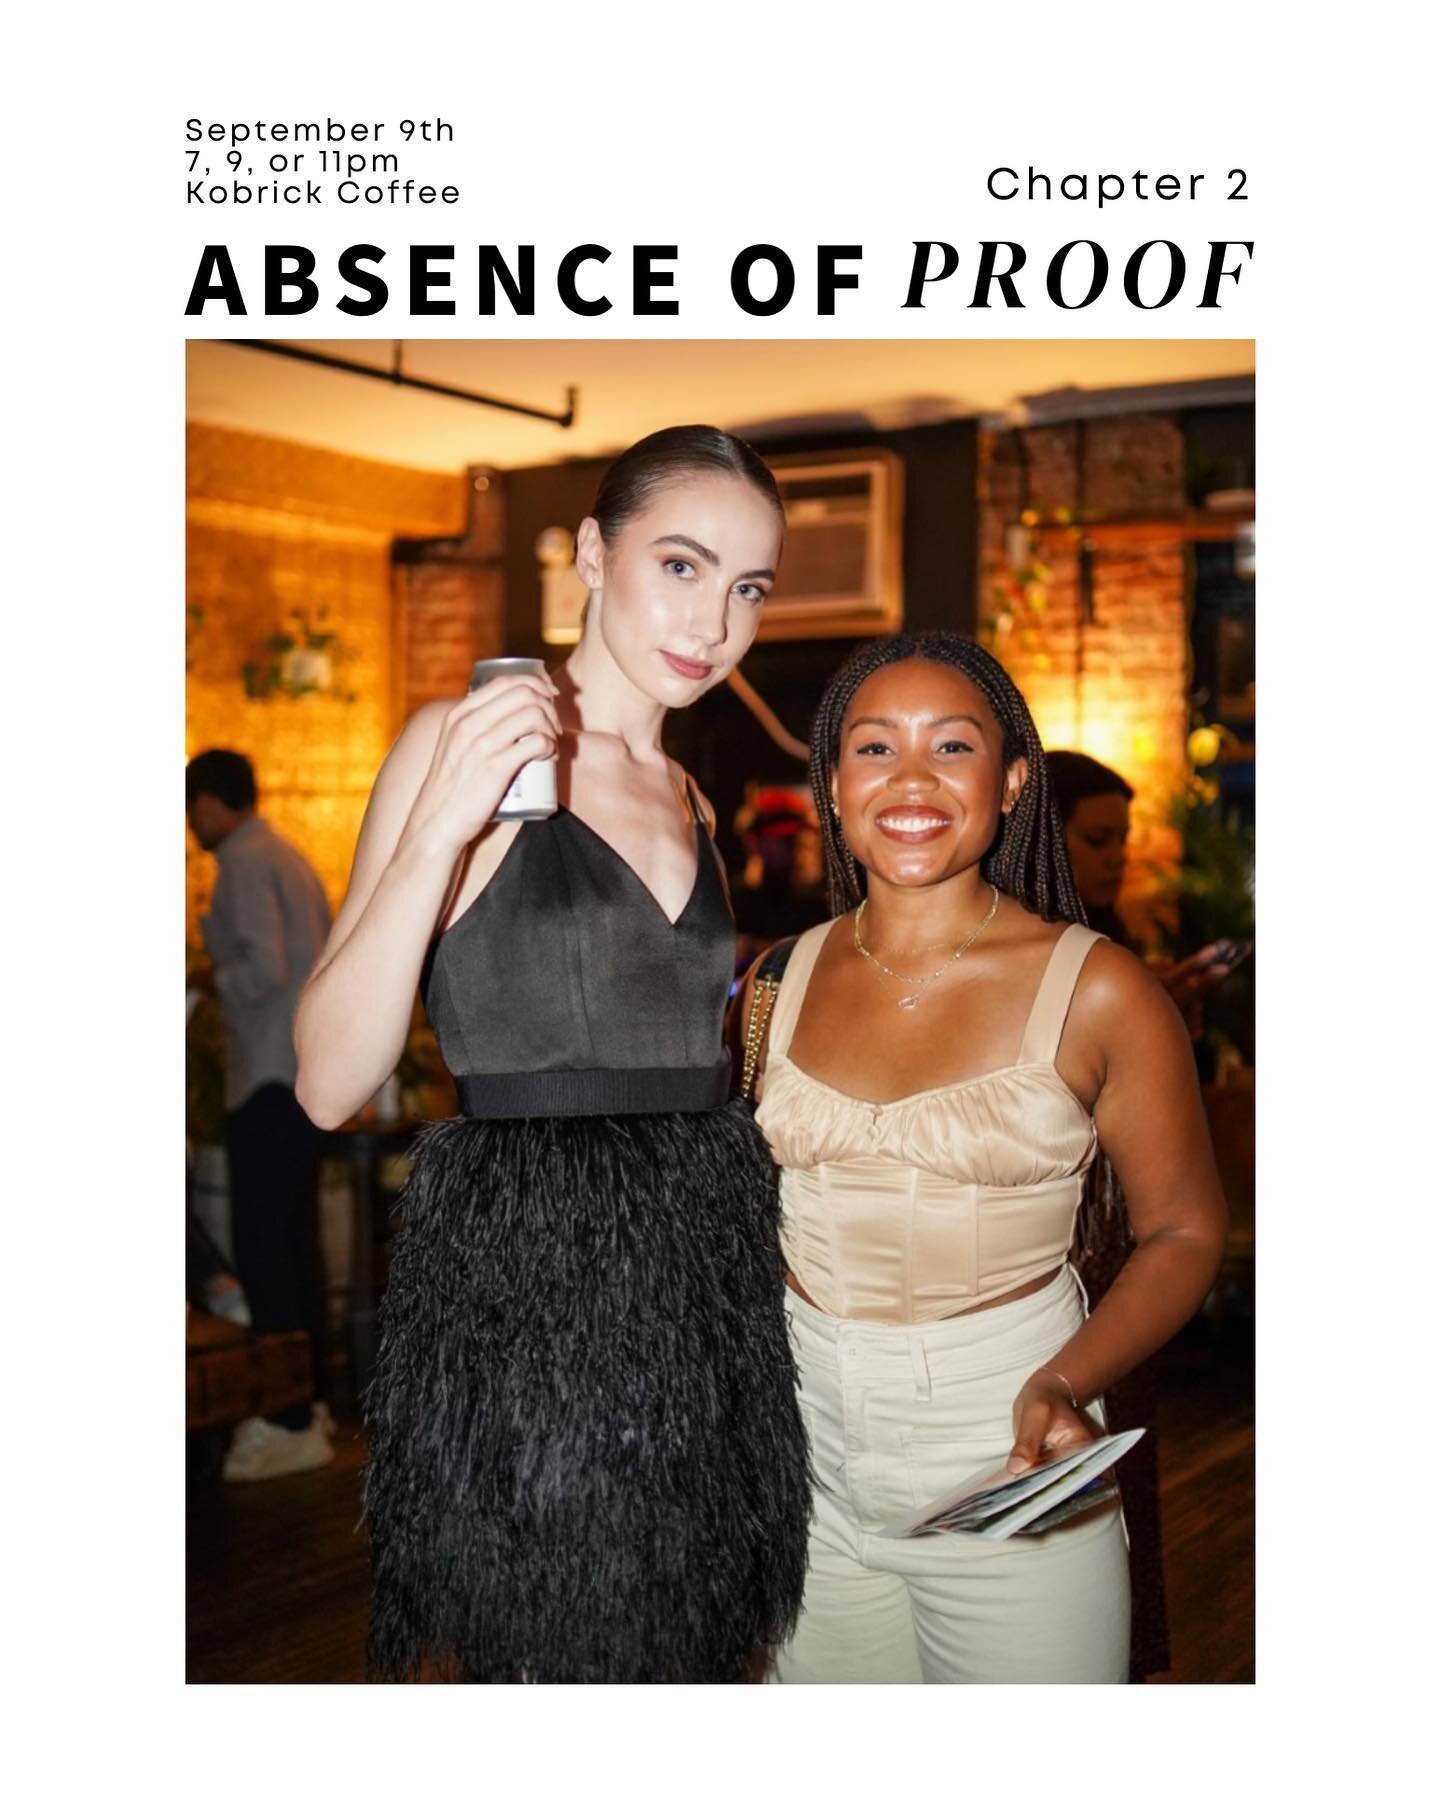 beyond excited to announce the second chapter of absence of proof on 9/9!  Tickets in bio 💃🪩

(It&rsquo;s also the first night of fashion week so wear your fav fit 🤩)

ps: to ensure everyone gets drinks quickly we&rsquo;re trying something differe